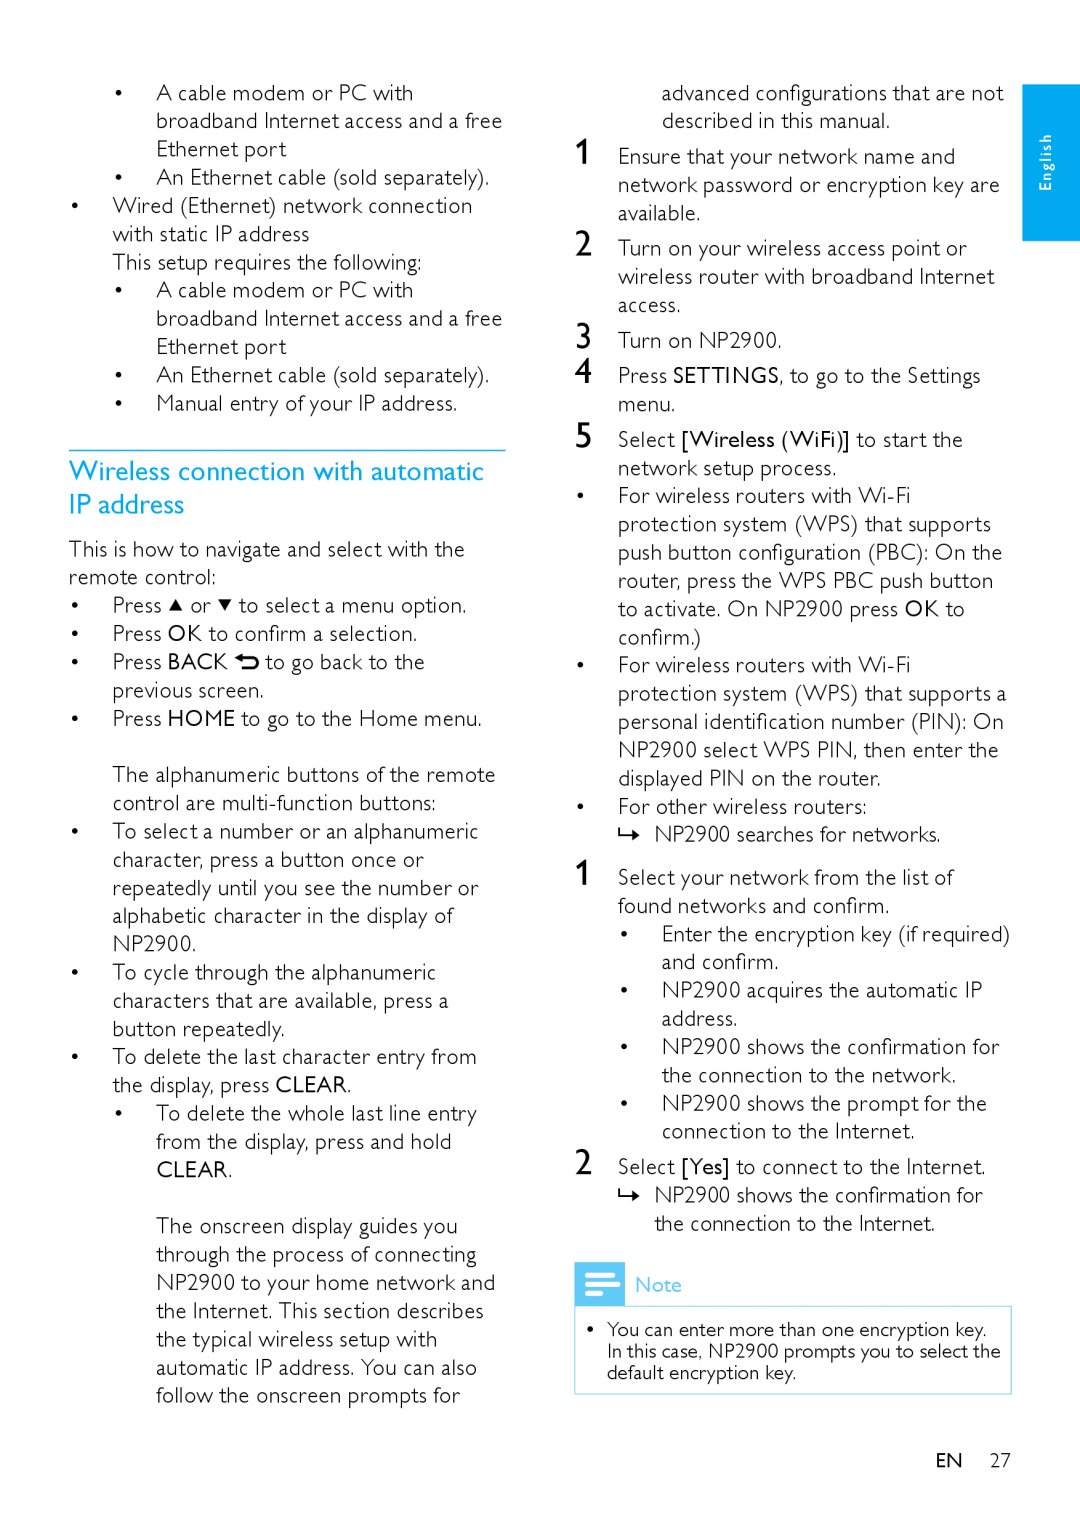 Philips NP2900 user manual Wireless connection with automatic IP address 